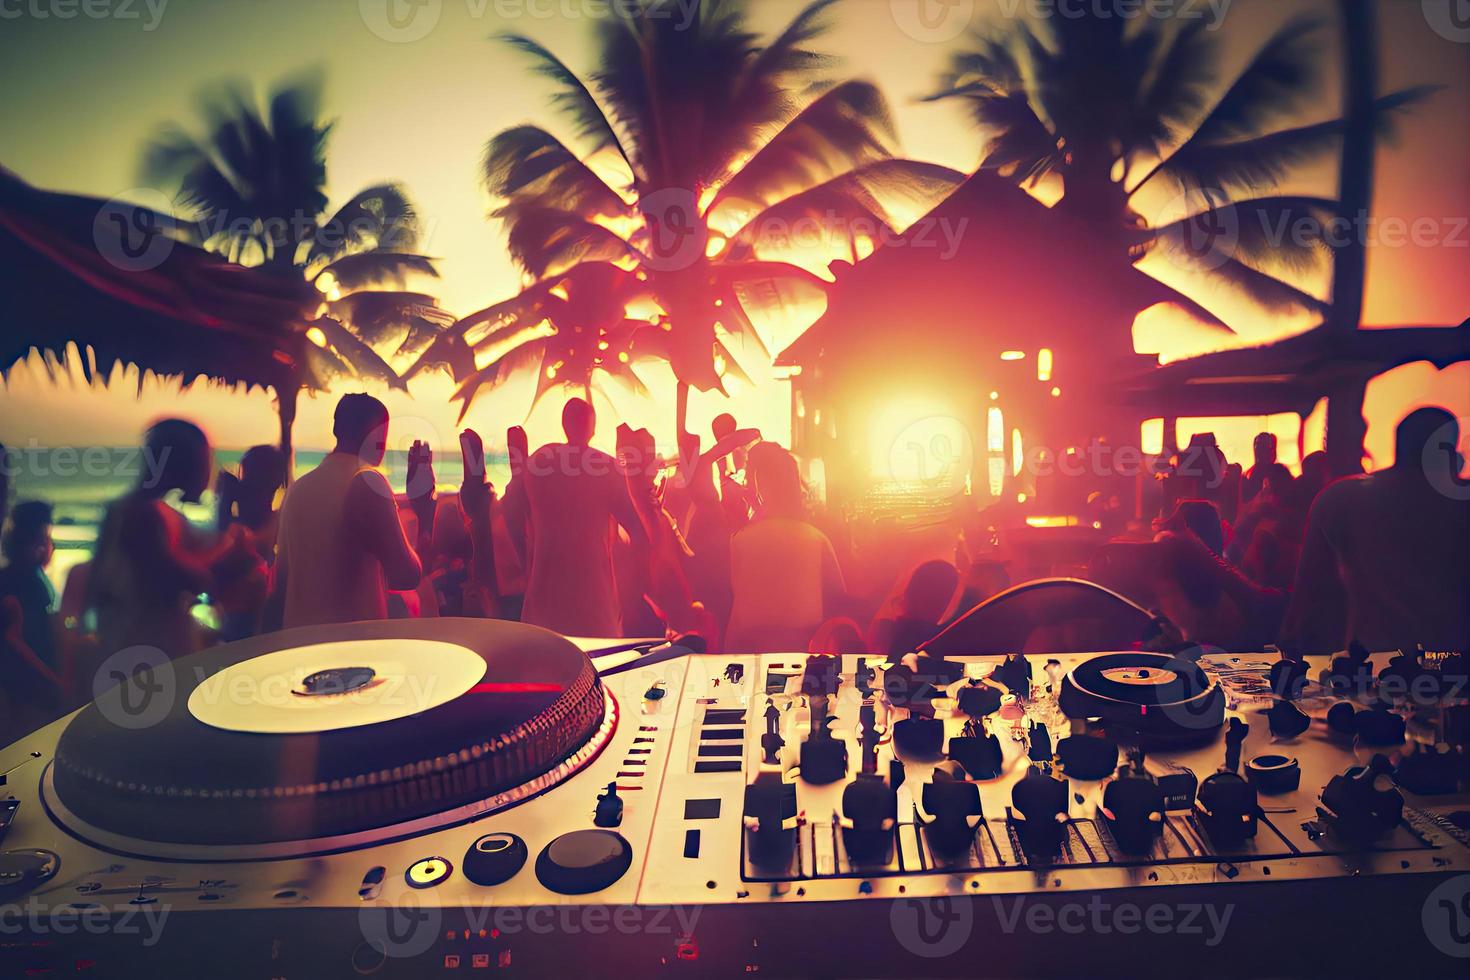 Dj mixing outdoor at beach party festival with crowd of people in background - Summer nightlife photo